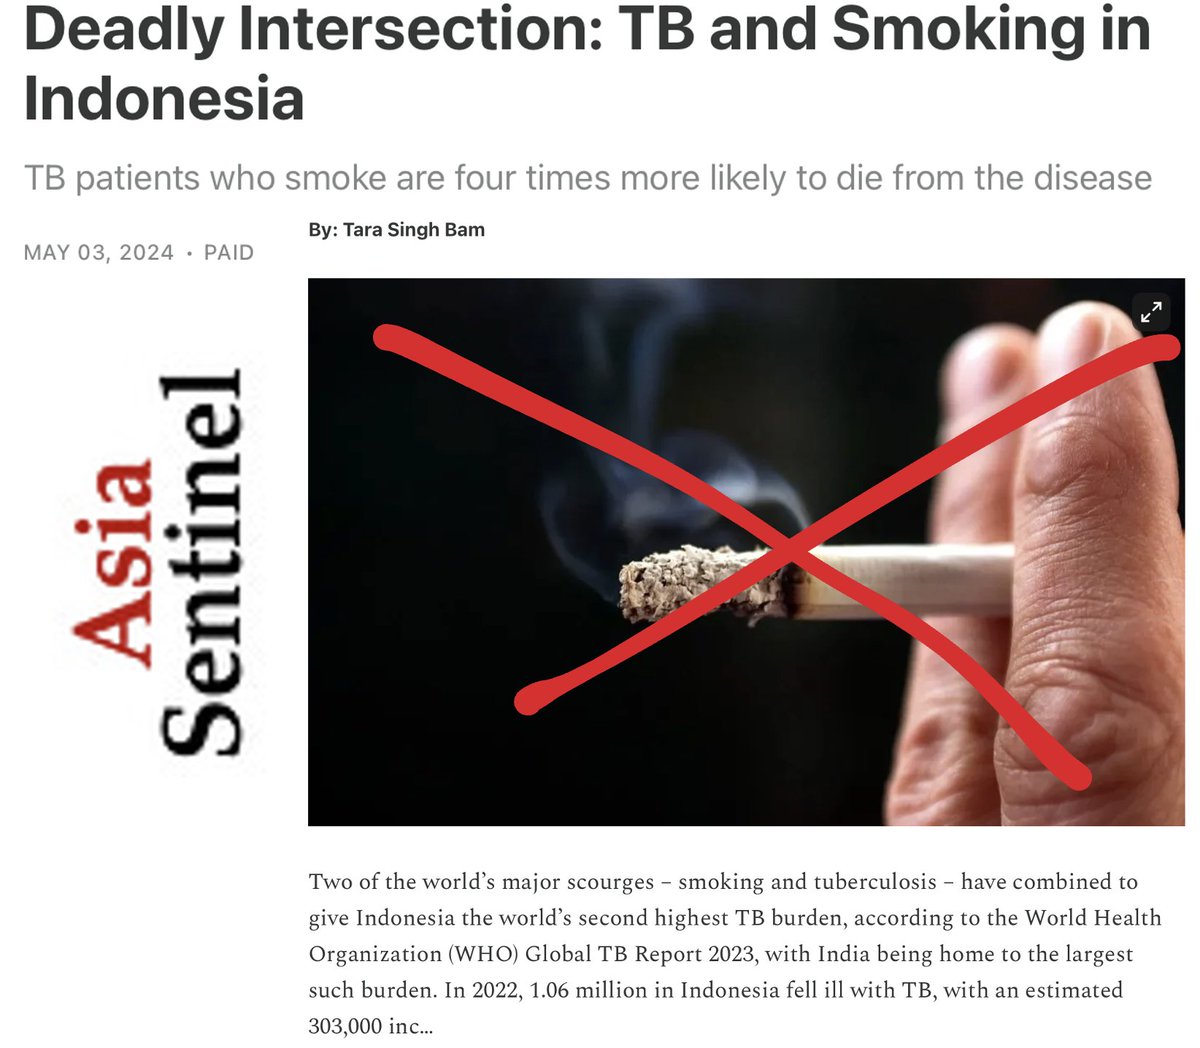 #PublishedToday | '2 of the world’s major scourges – #smoking and #tuberculosis – have combined to give #Indonesia the world’s 2nd highest #TB burden & made a global epicentre for tobacco use @Bam_Tara ✍️ ✅ASIA SENTINEL asiasentinel.com/p/deadly-inter… ✅CNS citizen-news.org/2024/05/the-de…